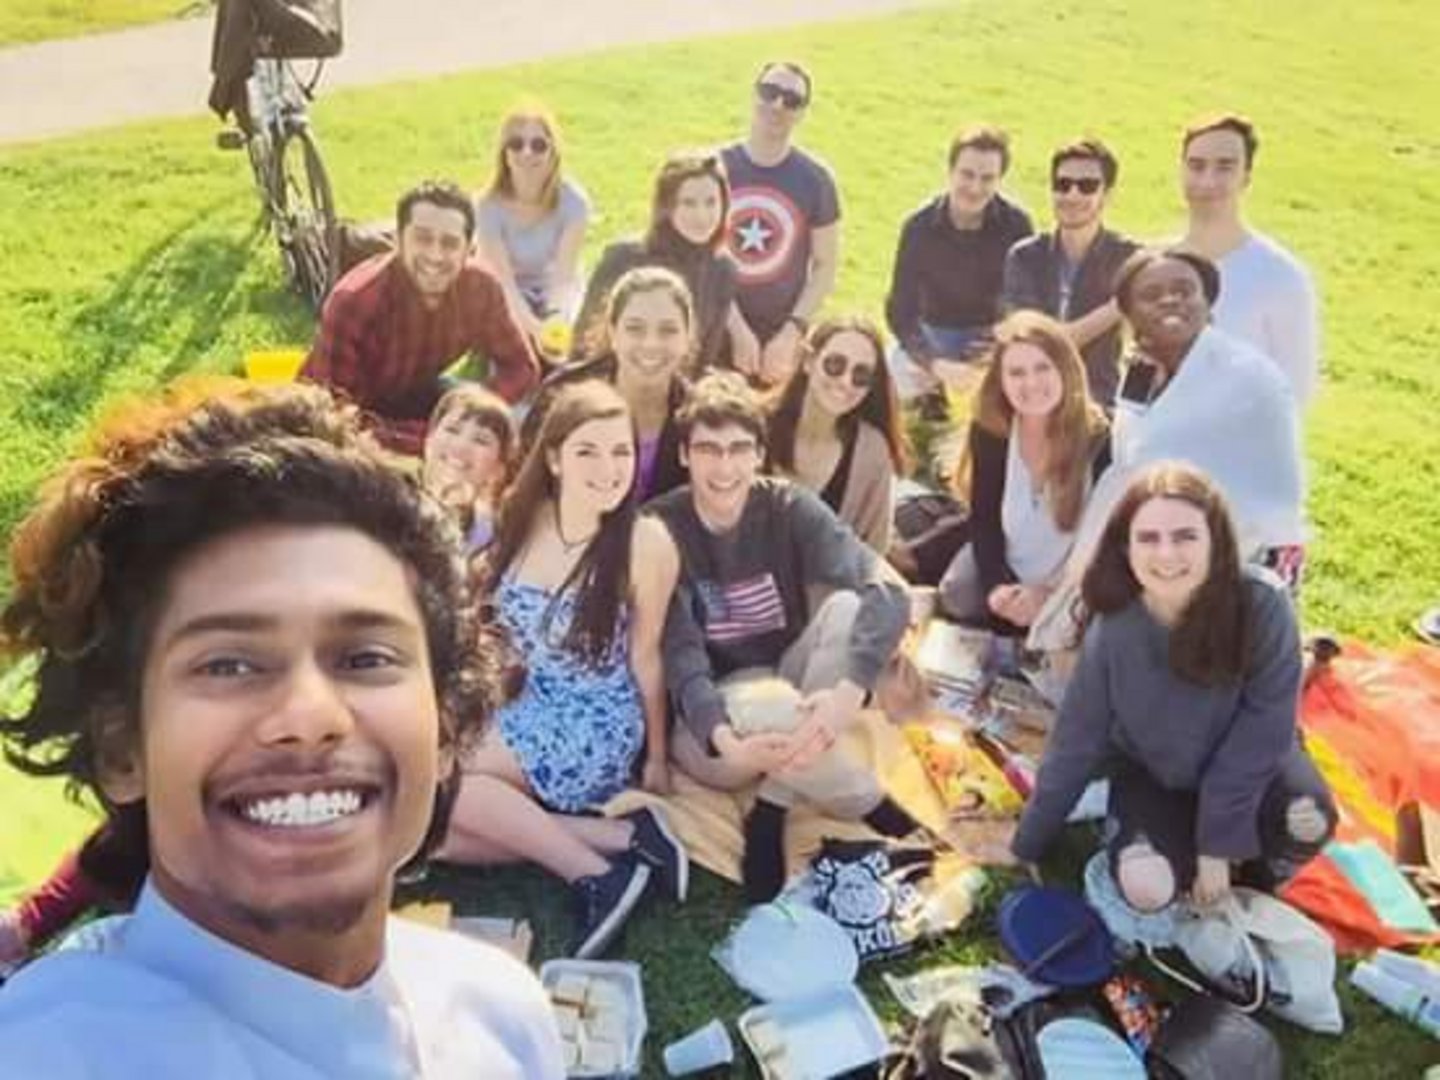 Selfie of 15 Students having a picnic in a park. They are sitting on blankets and have some food surronding them.